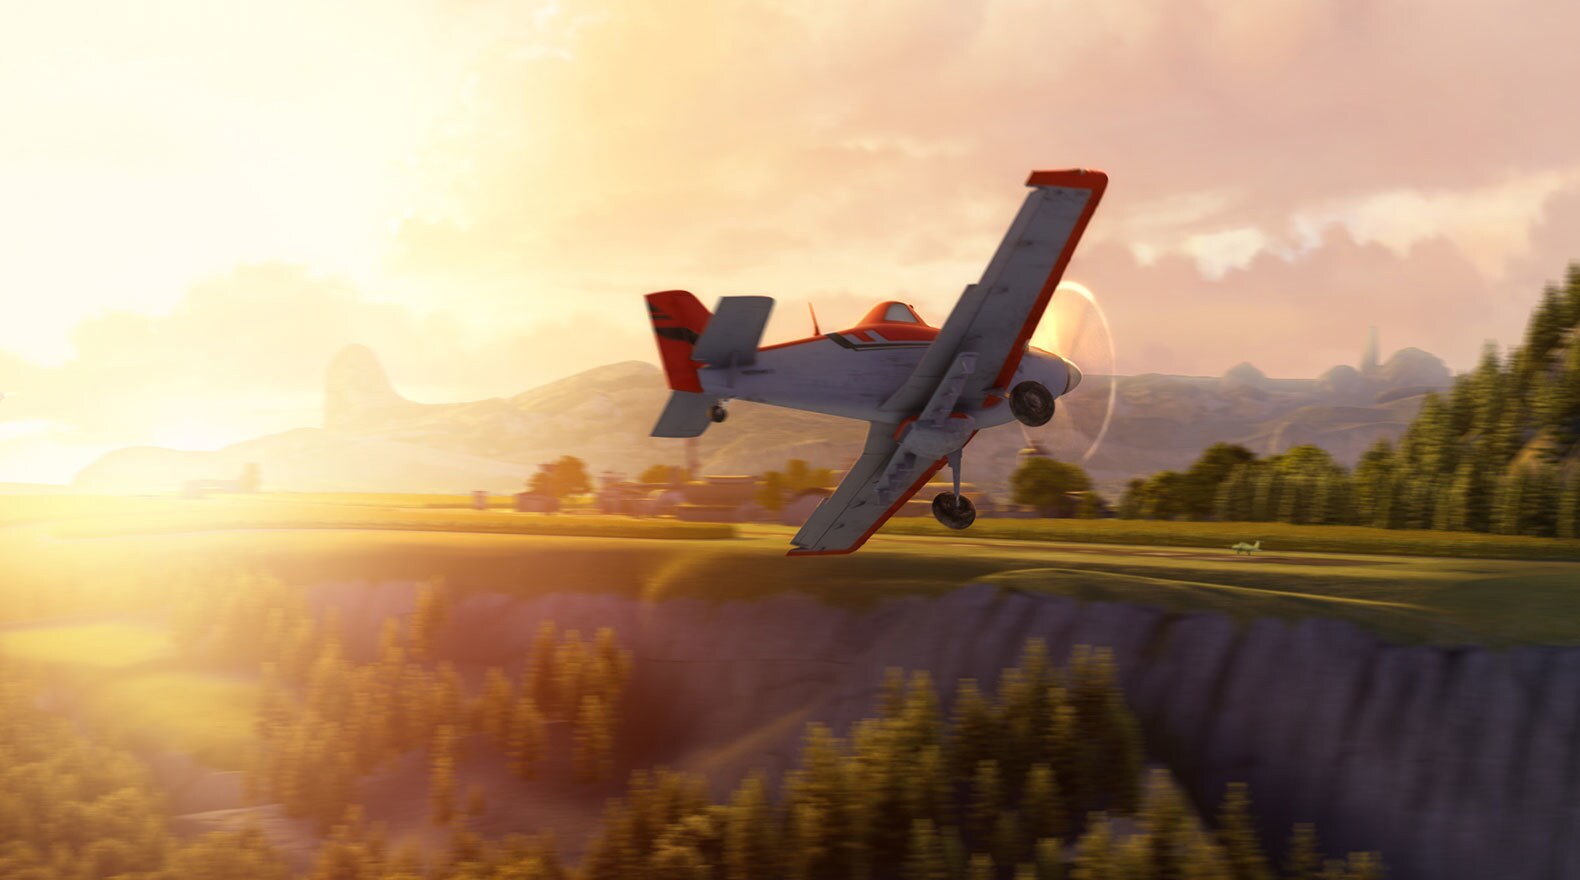 Dusty flies over Propwash Junction, his hometown from the movie "Planes"